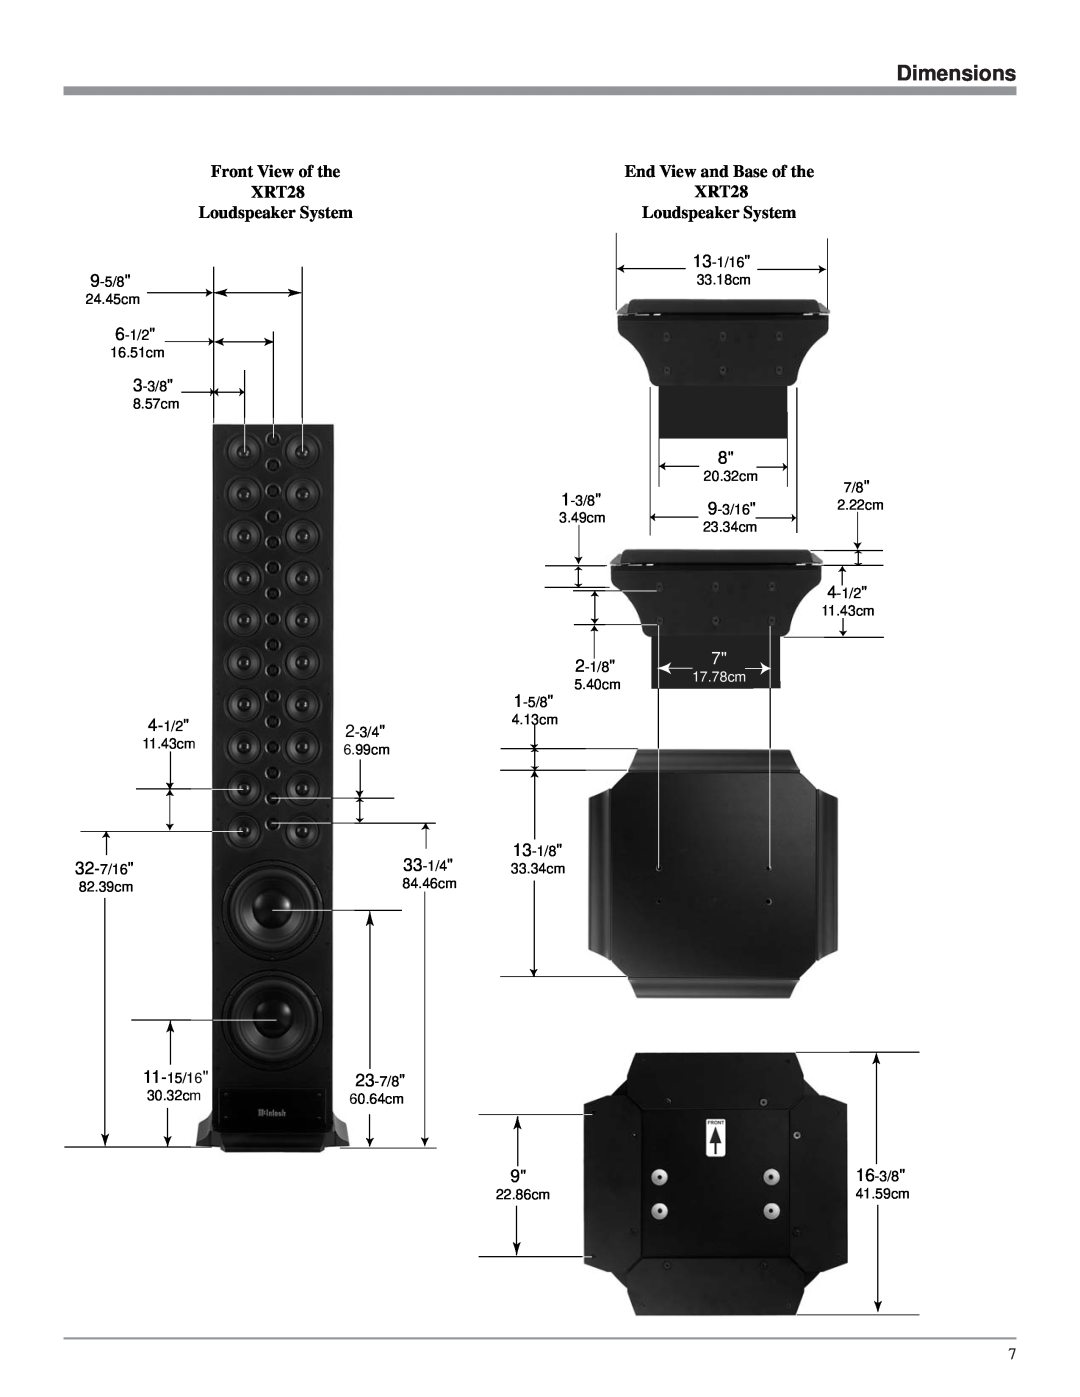 McIntosh XRT28 Dimensions, Front View of the, End View and Base of the, Loudspeaker System, 4-1/2, 32-7/16, 17.78cm 